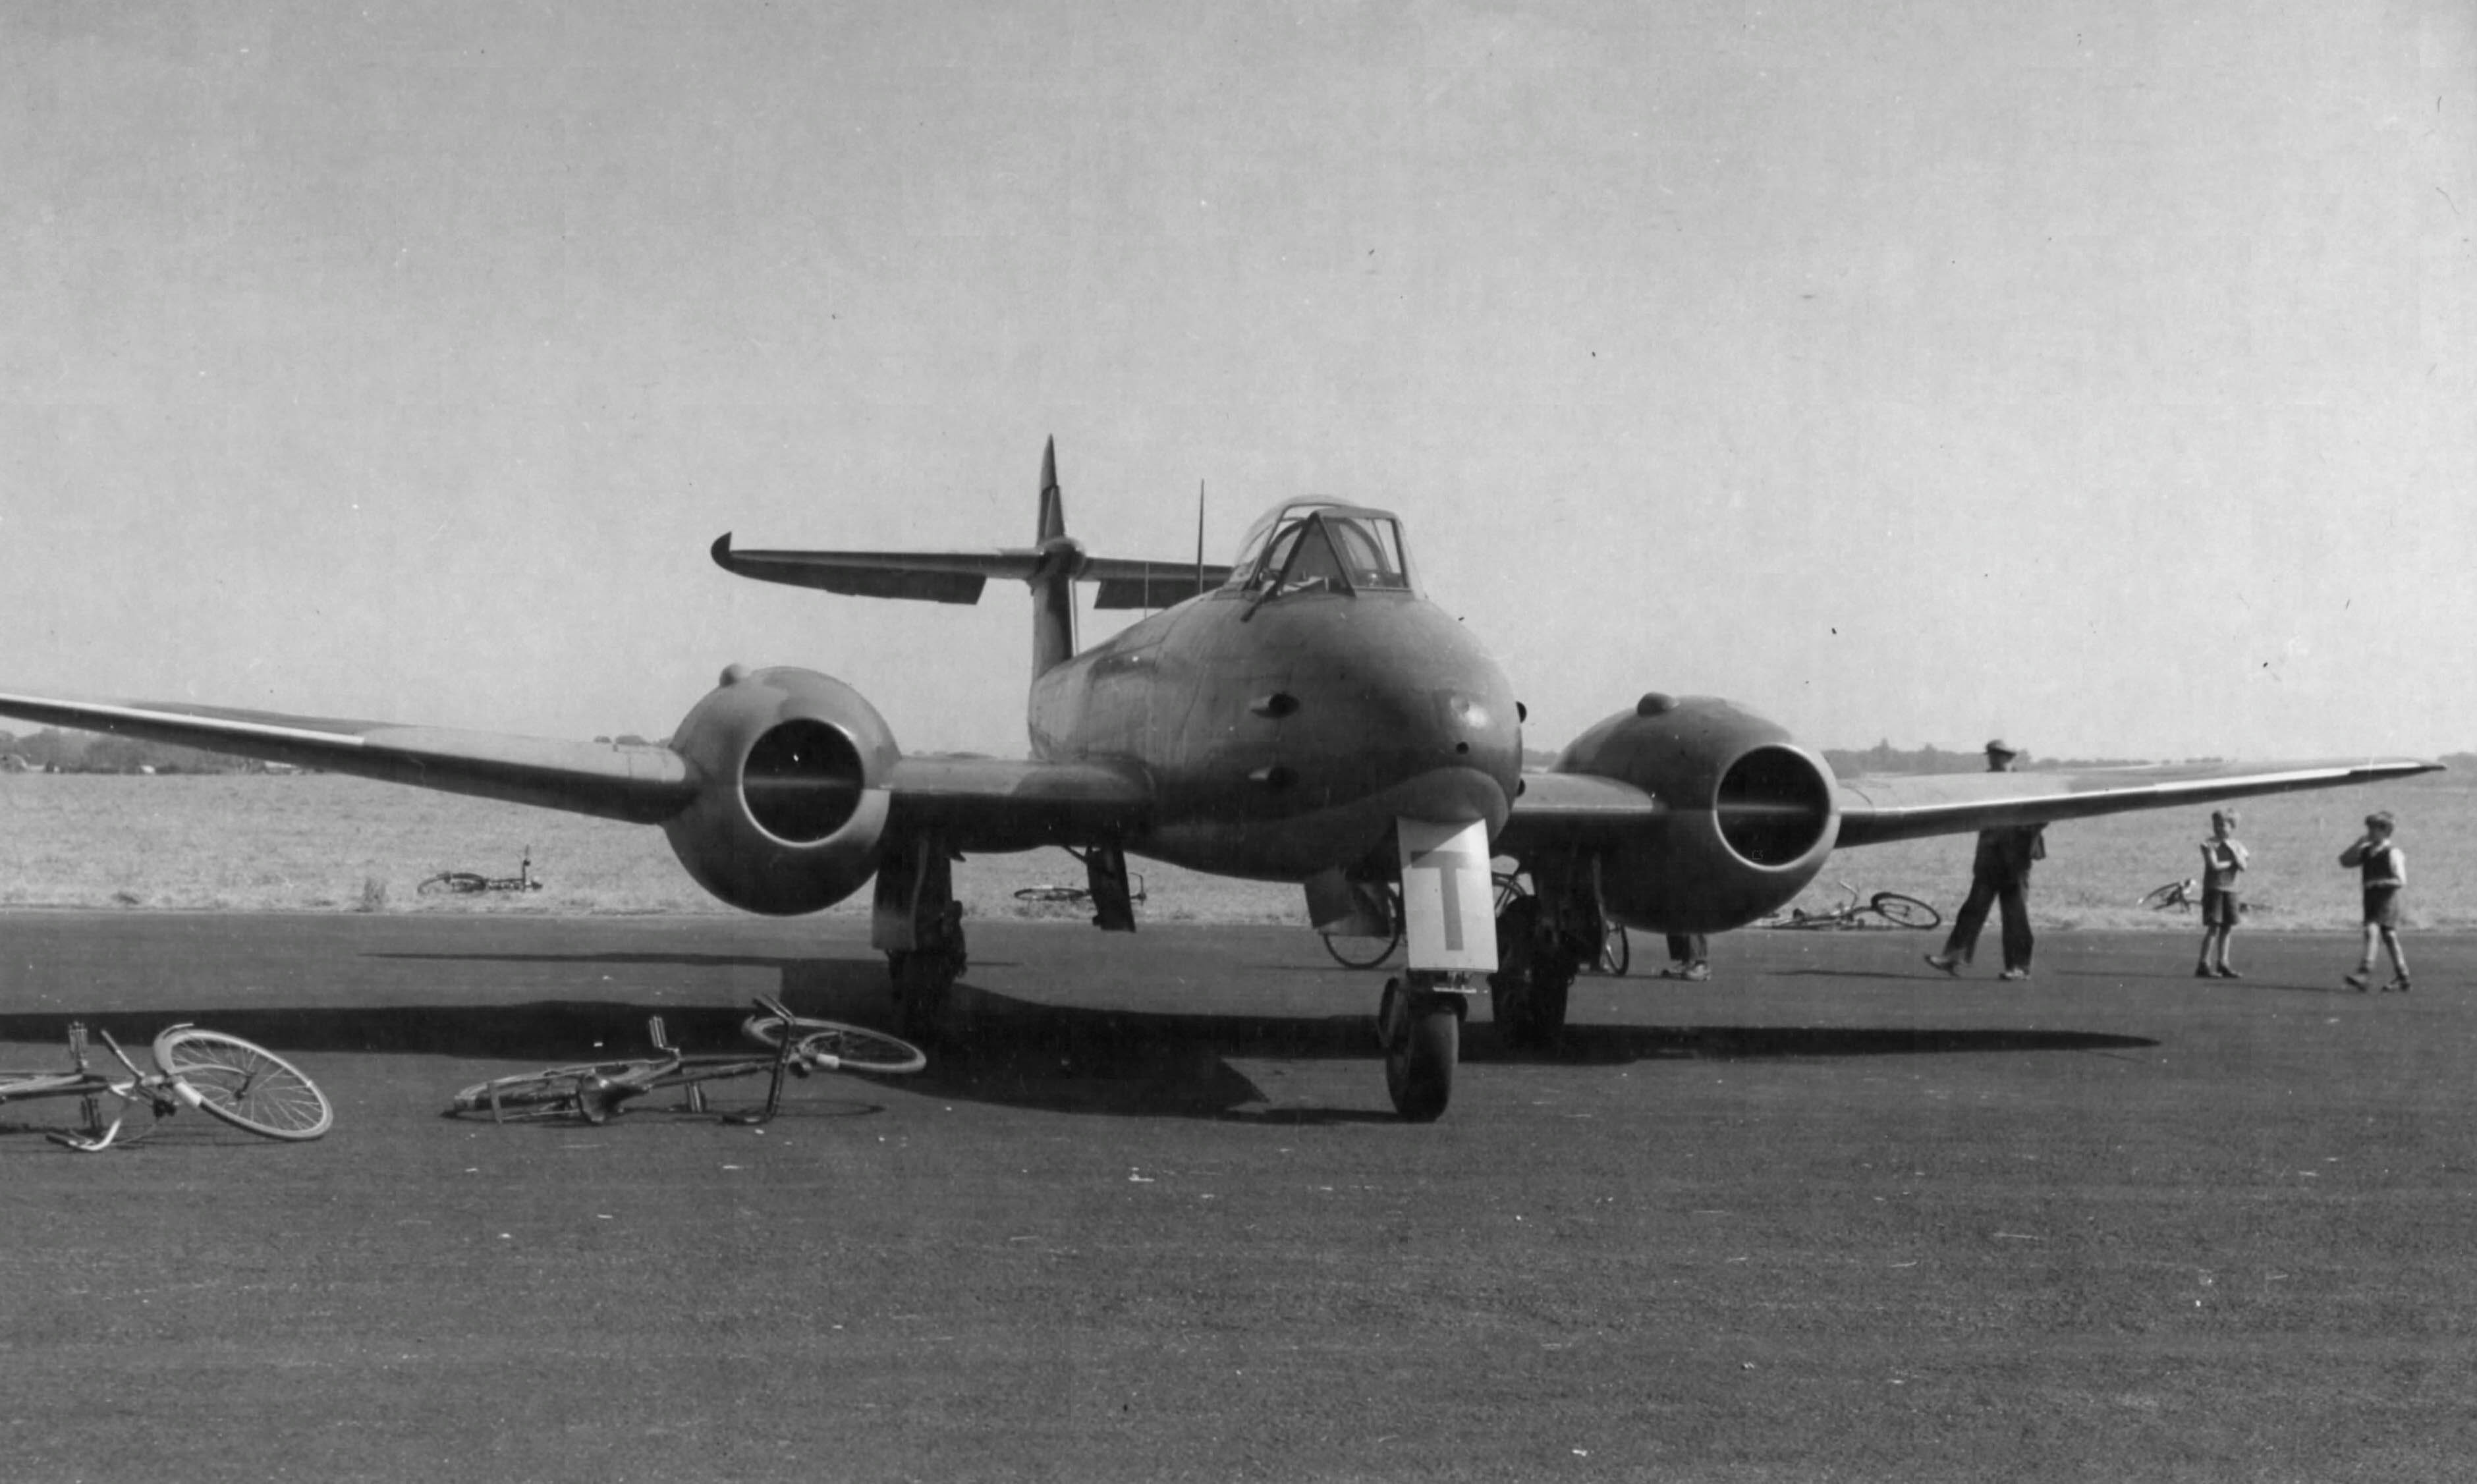 A British Meteor jet fighter photographed at an airfield in England, August 1945. (U.S. Air Force Photograph.)